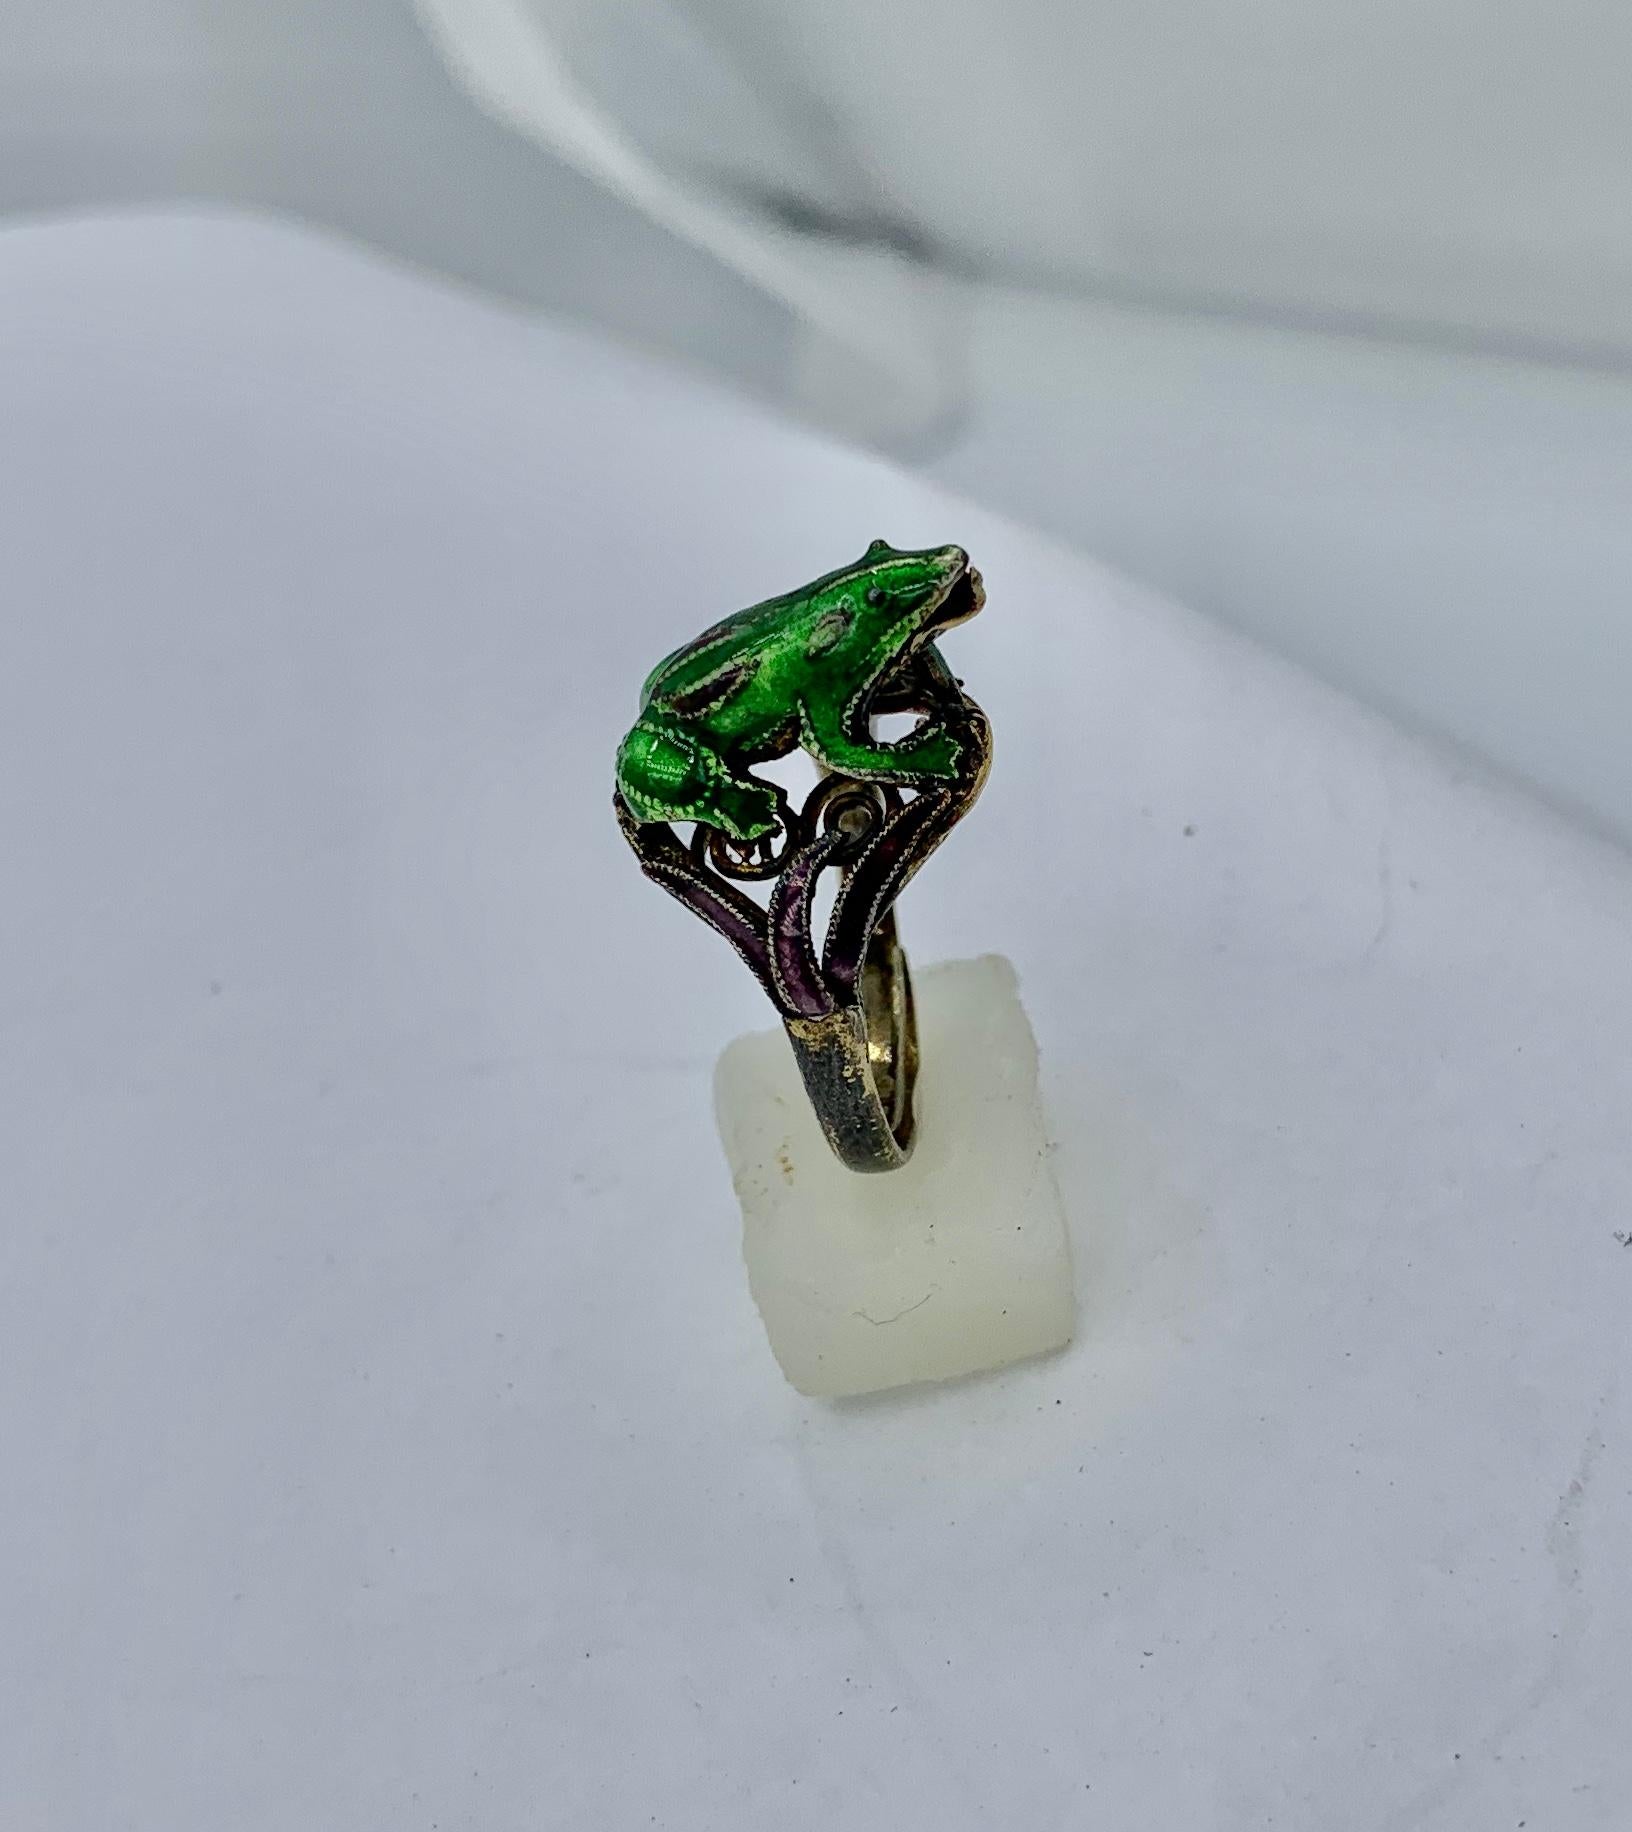 This is an absolutely wonderful antique Frog Ring in Silver with gorgeous green enamel and with the frog's tongue curving up to catch its favorite snack!   The stunning fully modeled three dimensional frog is depicted perched on green leaves with